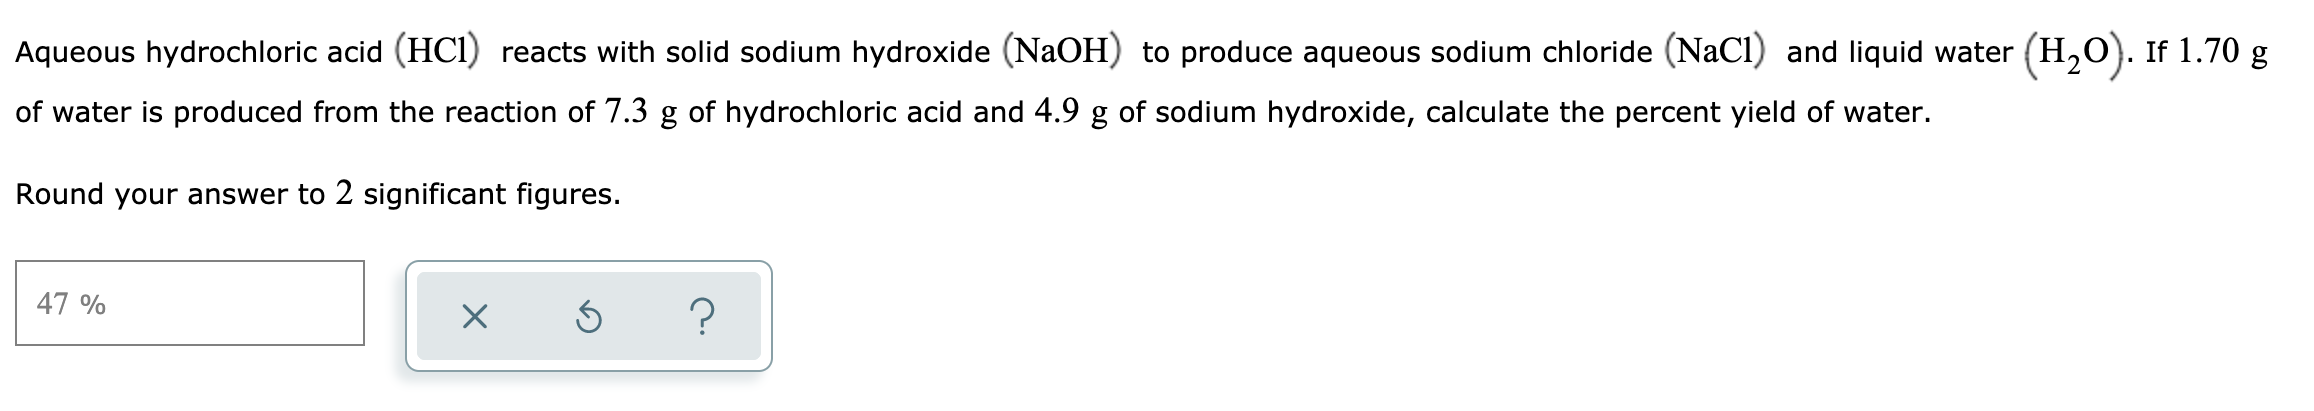 Aqueous hydrochloric acid (HCI) reacts with solid sodium hydroxide (NaOH) to produce aqueous sodium chloride (NaCl) and liquid water (H,O). If 1.70 g
of water is produced from the reaction of 7.3 g of hydrochloric acid and 4.9 g of sodium hydroxide, calculate the percent yield of water.
Round your answer to 2 significant figures.
47 %
